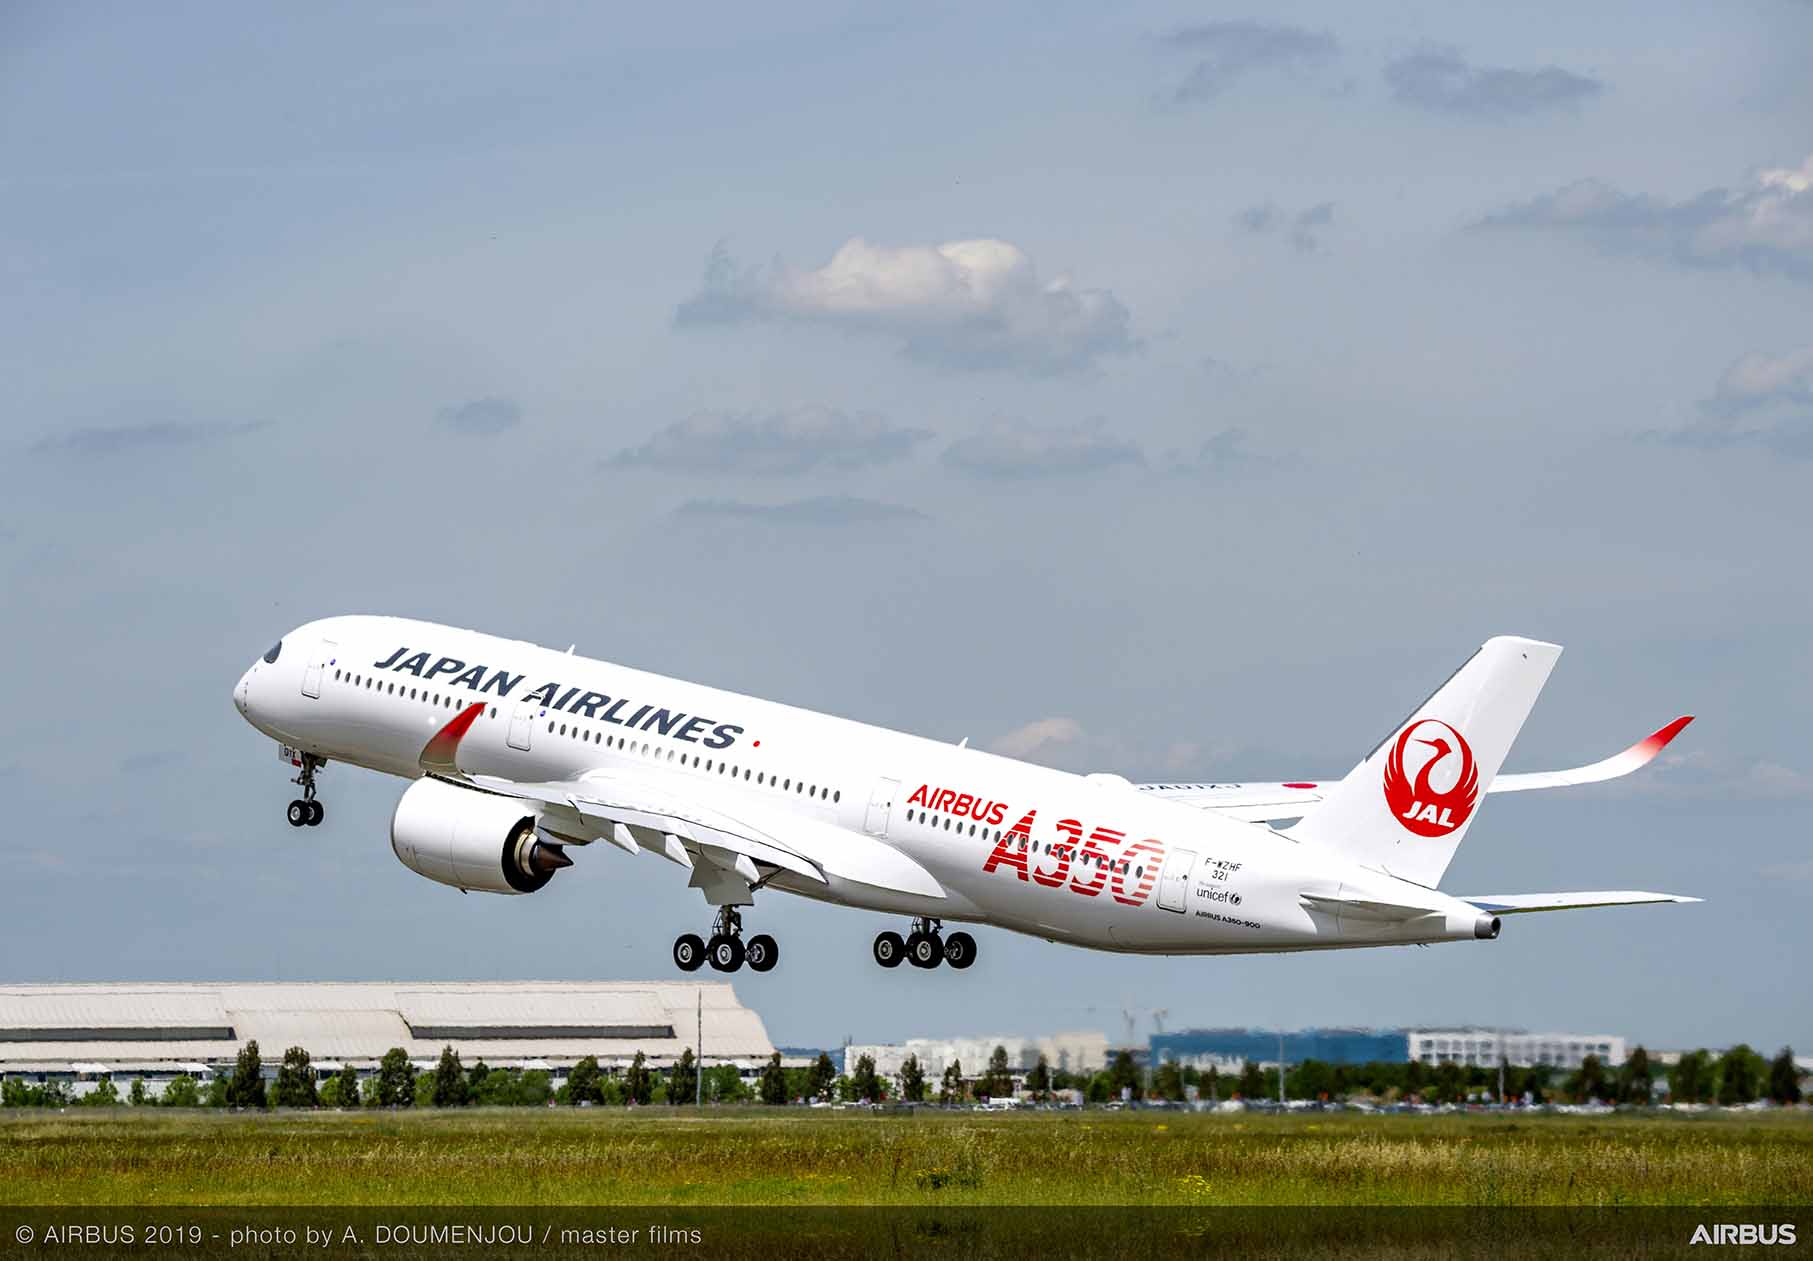 JAL engineering division selects IFS solution for aircraft fleet maintenance